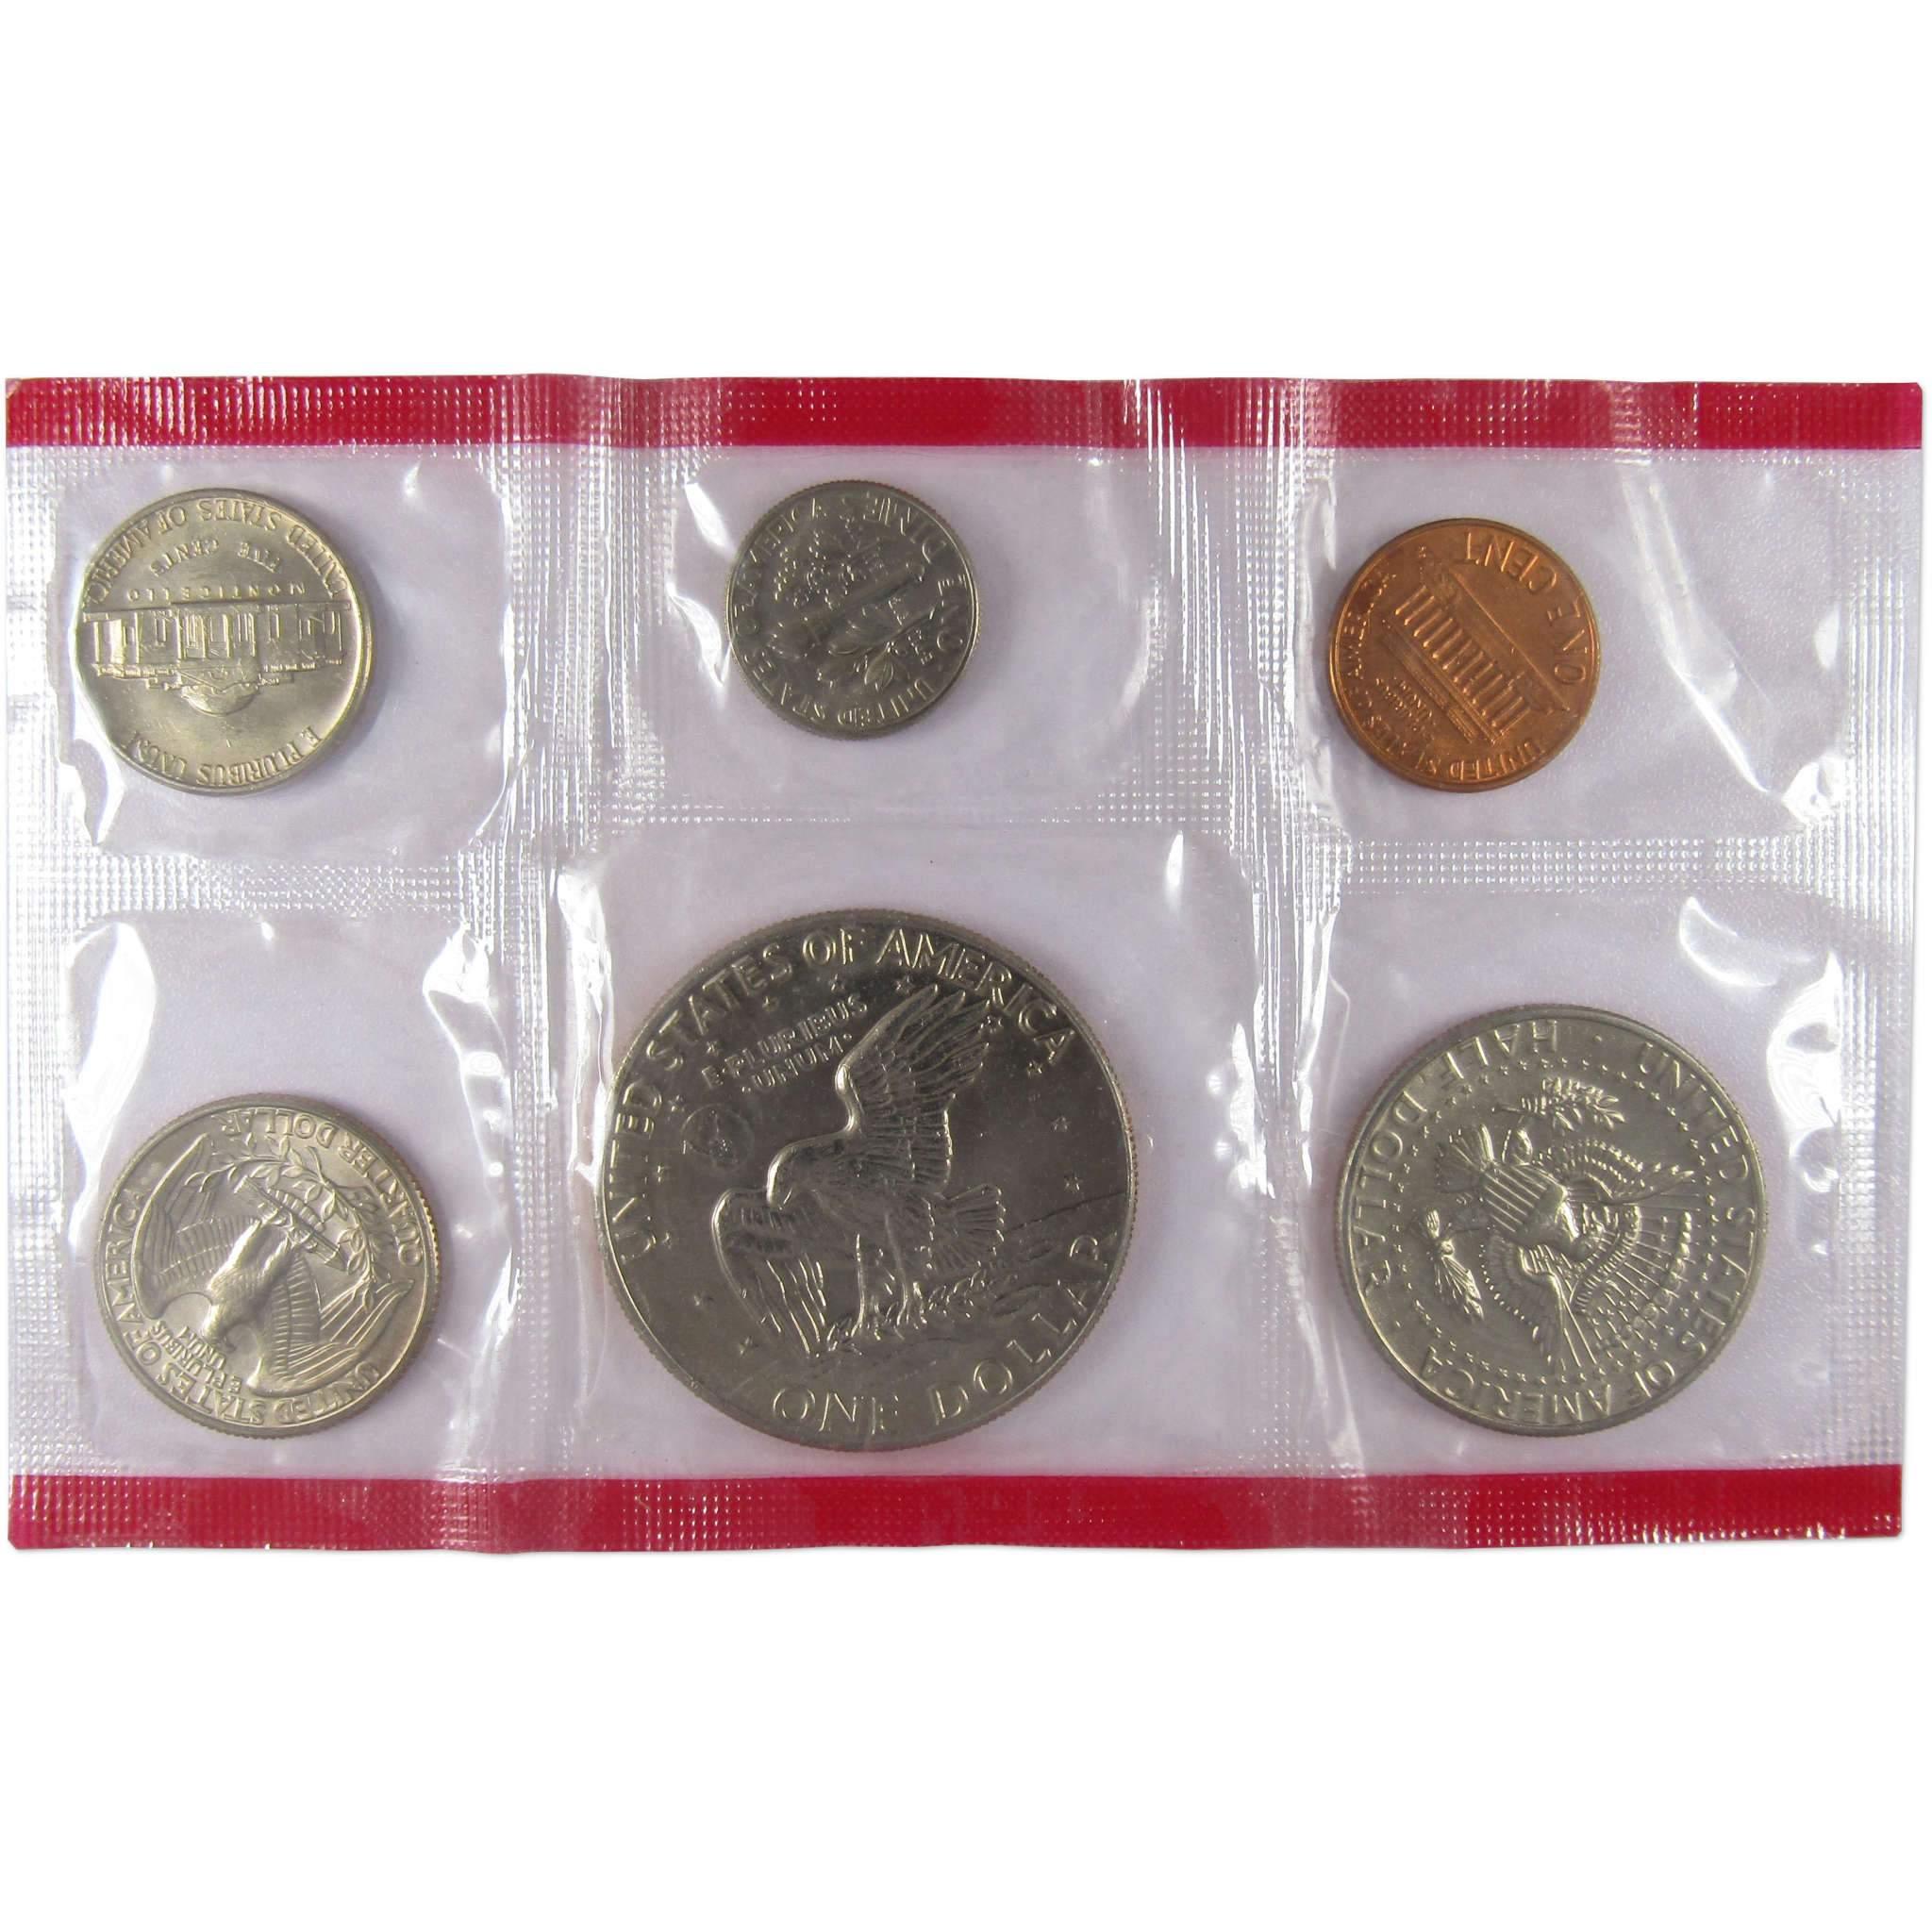 1977 Uncirculated Coin Set U.S Mint Original Government Packaging OGP